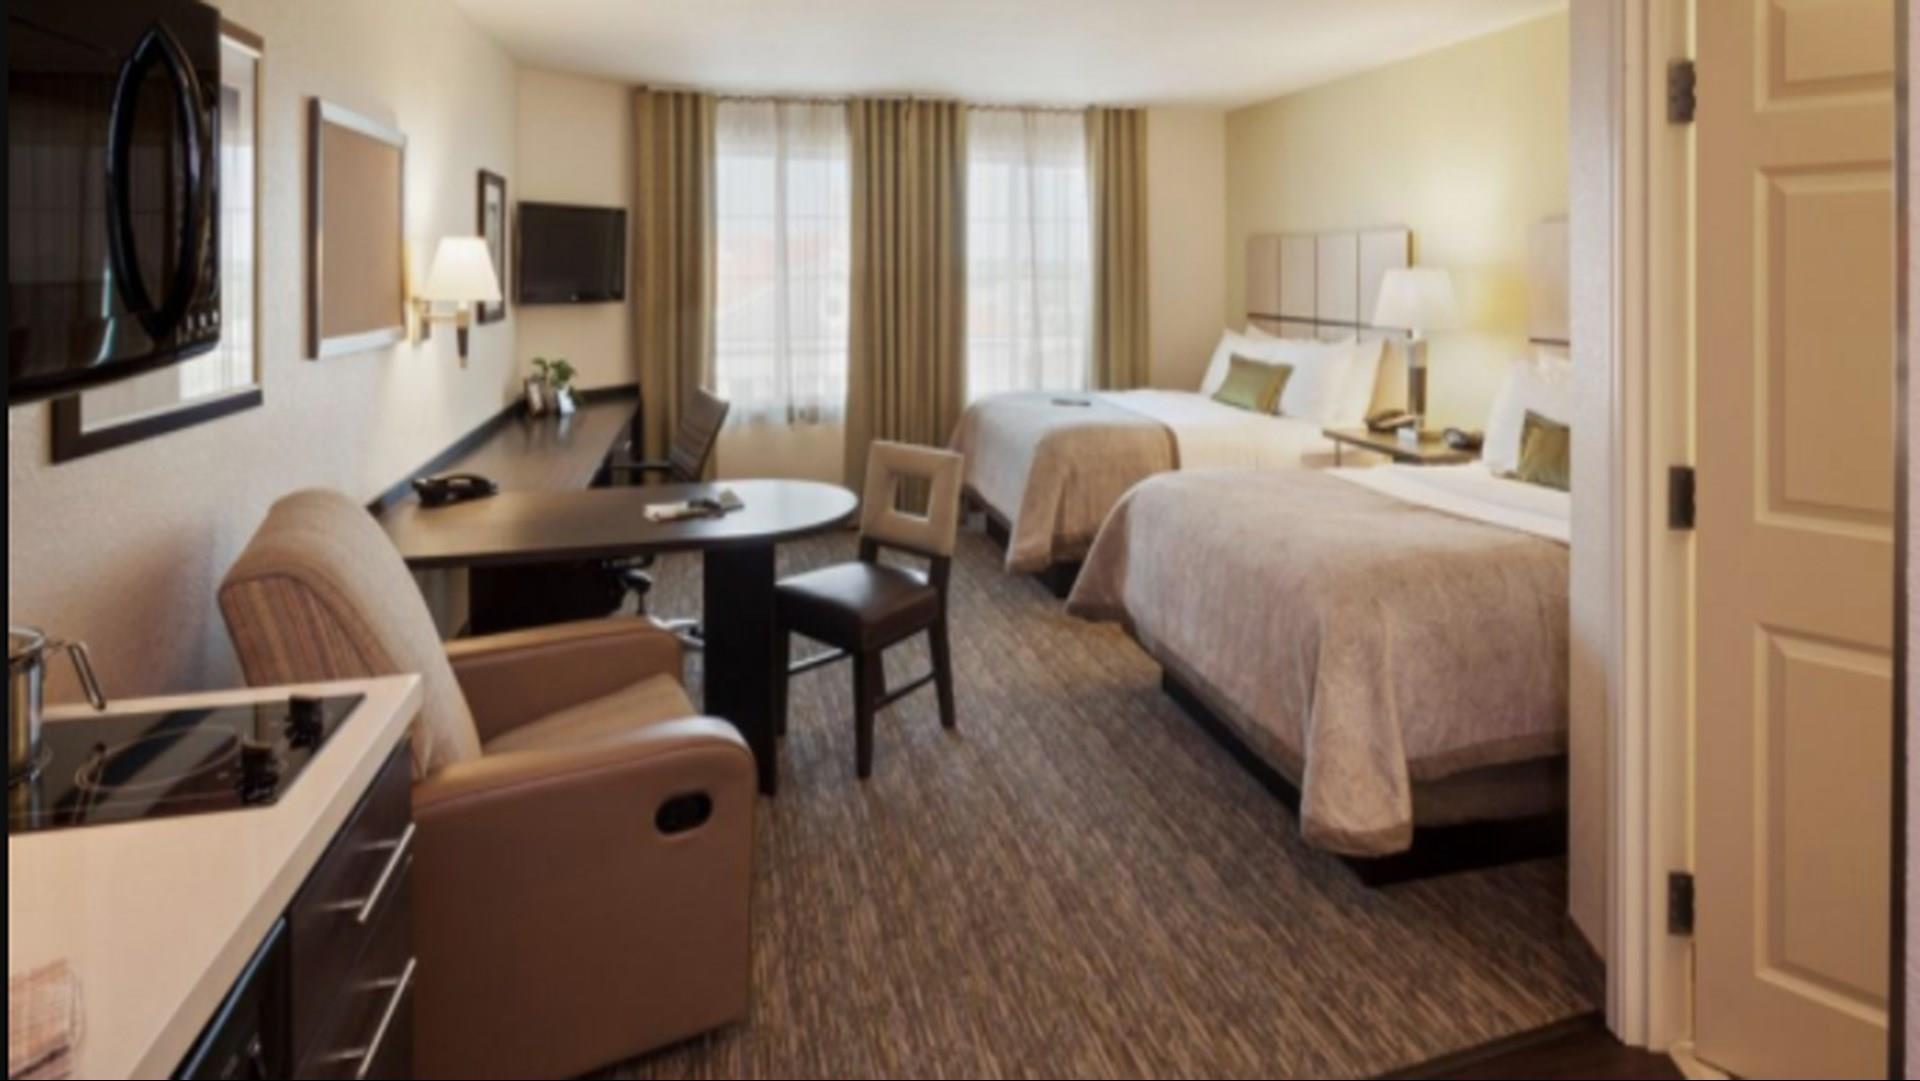 Candlewood Suites Baltimore - Inner Harbor in Baltimore, MD